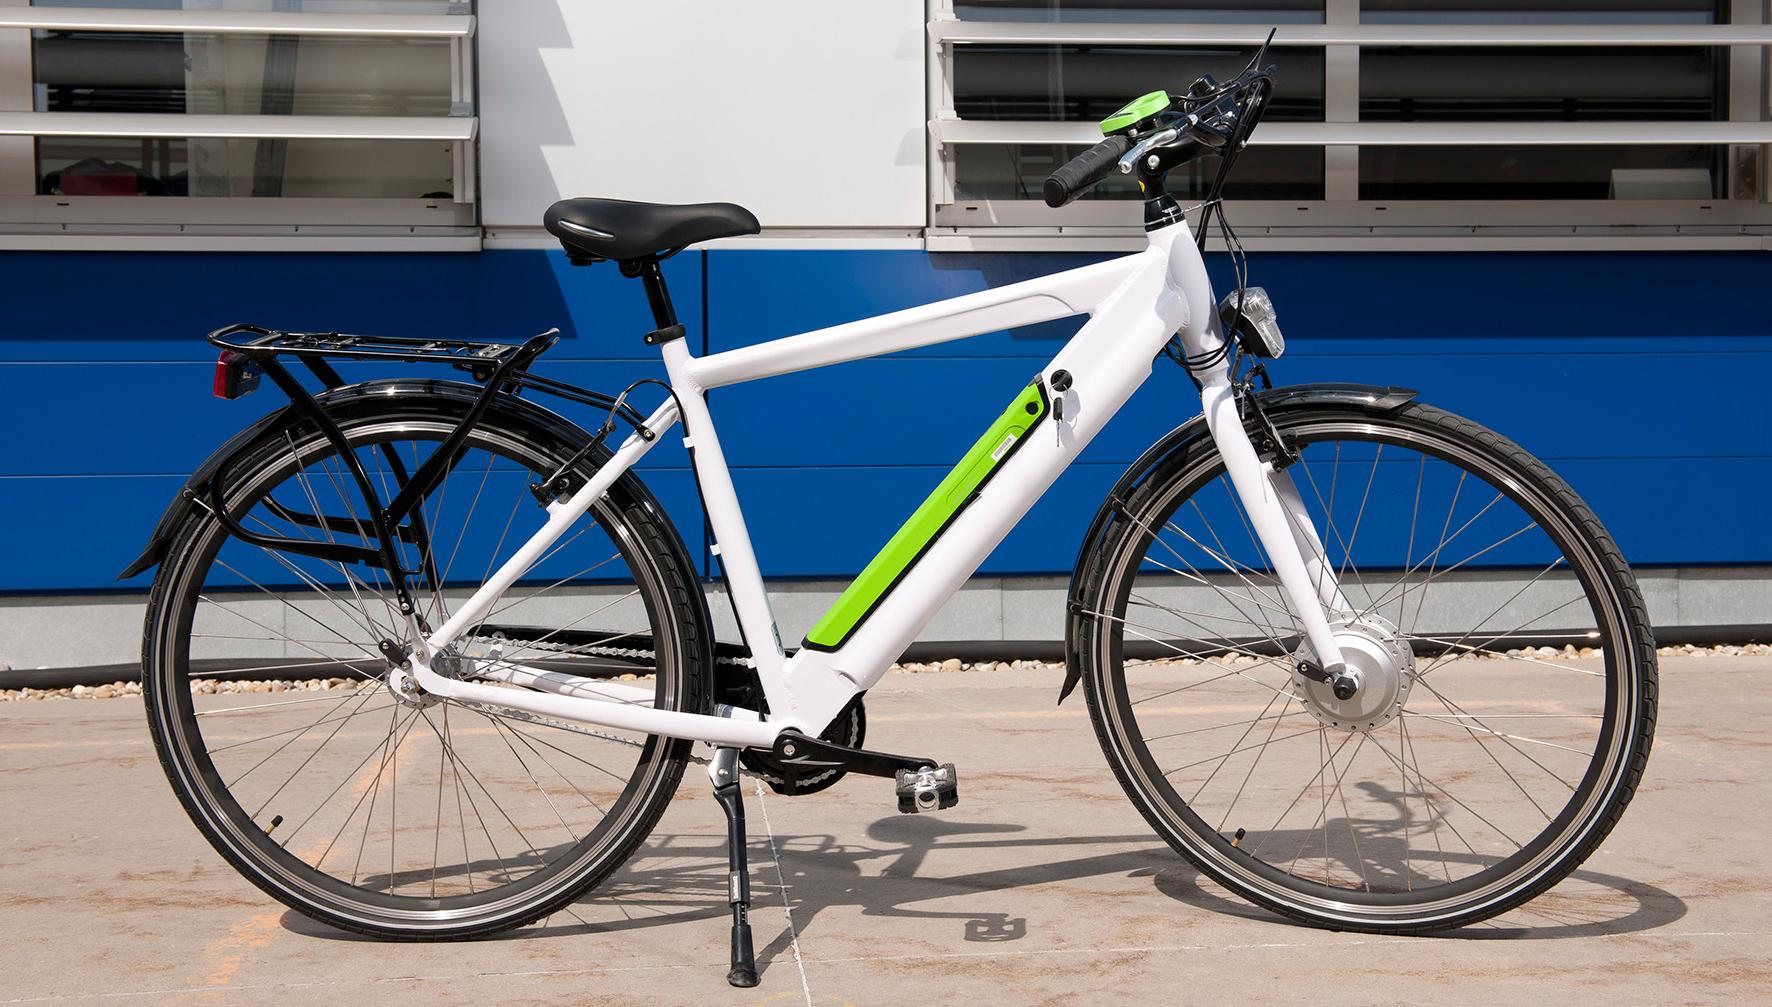 IKEA’s Selling An Electric Bike To Help Get All Those Boxes Home